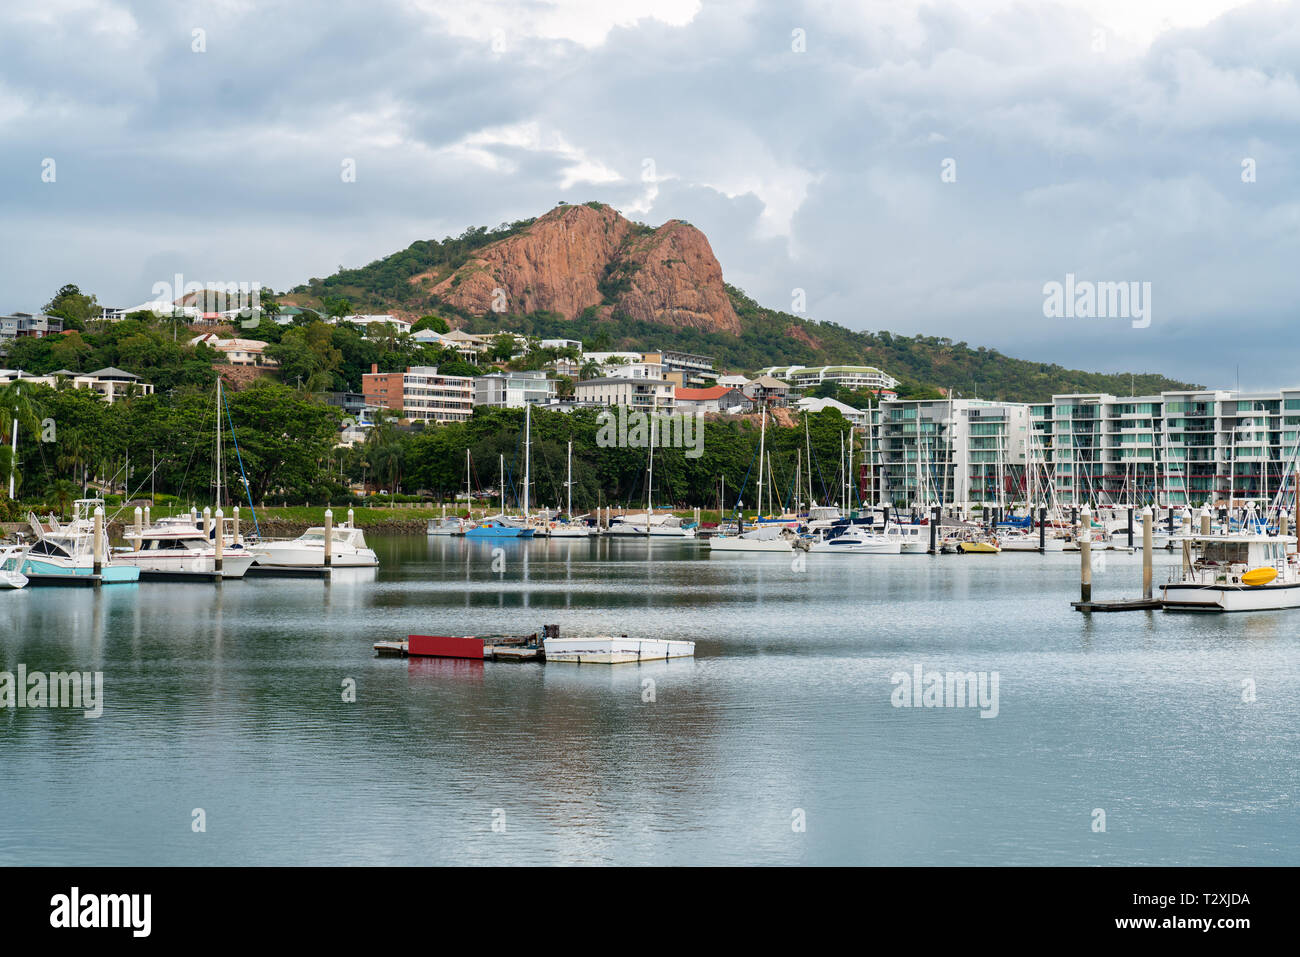 Boats moored in the Townsville Marina with iconic Castle Hill in the background Stock Photo